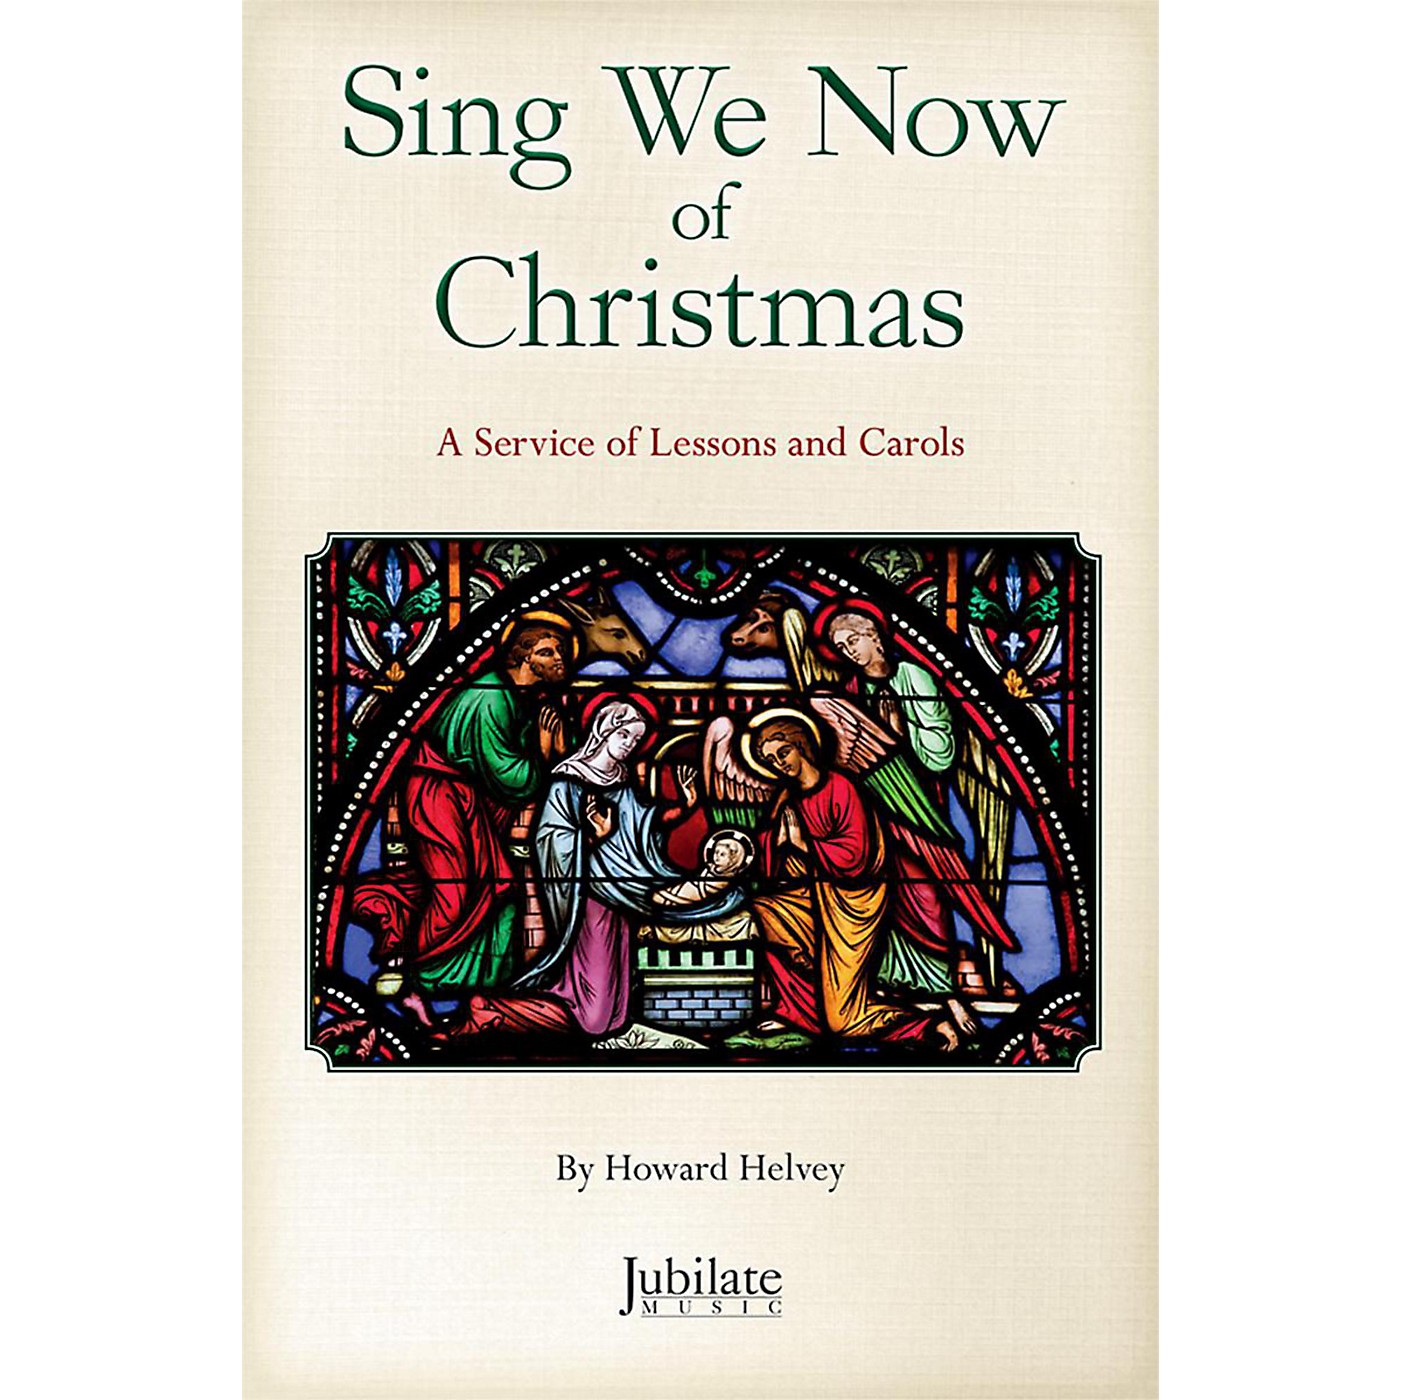 JUBILATE Sing We Now of Christmas CD Preview Pack Book & CD thumbnail